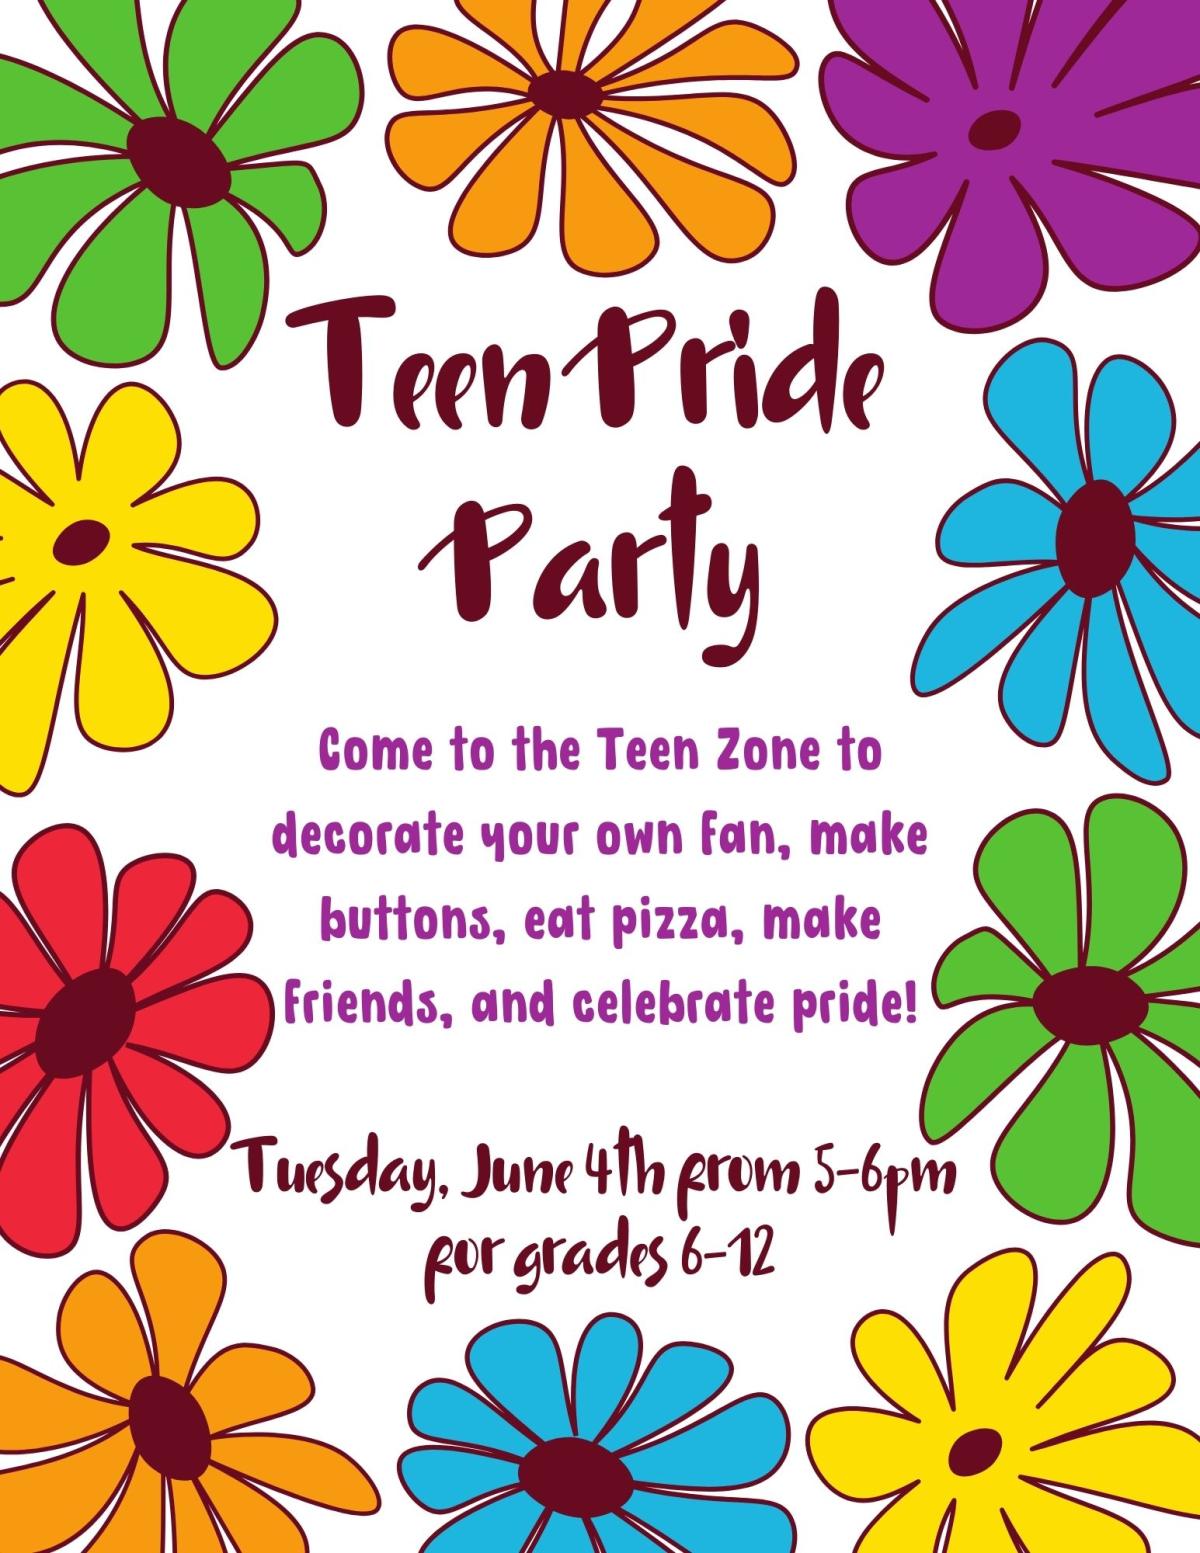 A flyer for the Teen Pride Party surrounded by flowers, stating "Come to the Teen Zone to decorate your own fan, make buttons, eat pizza, make friends, and celebrate pride!" 